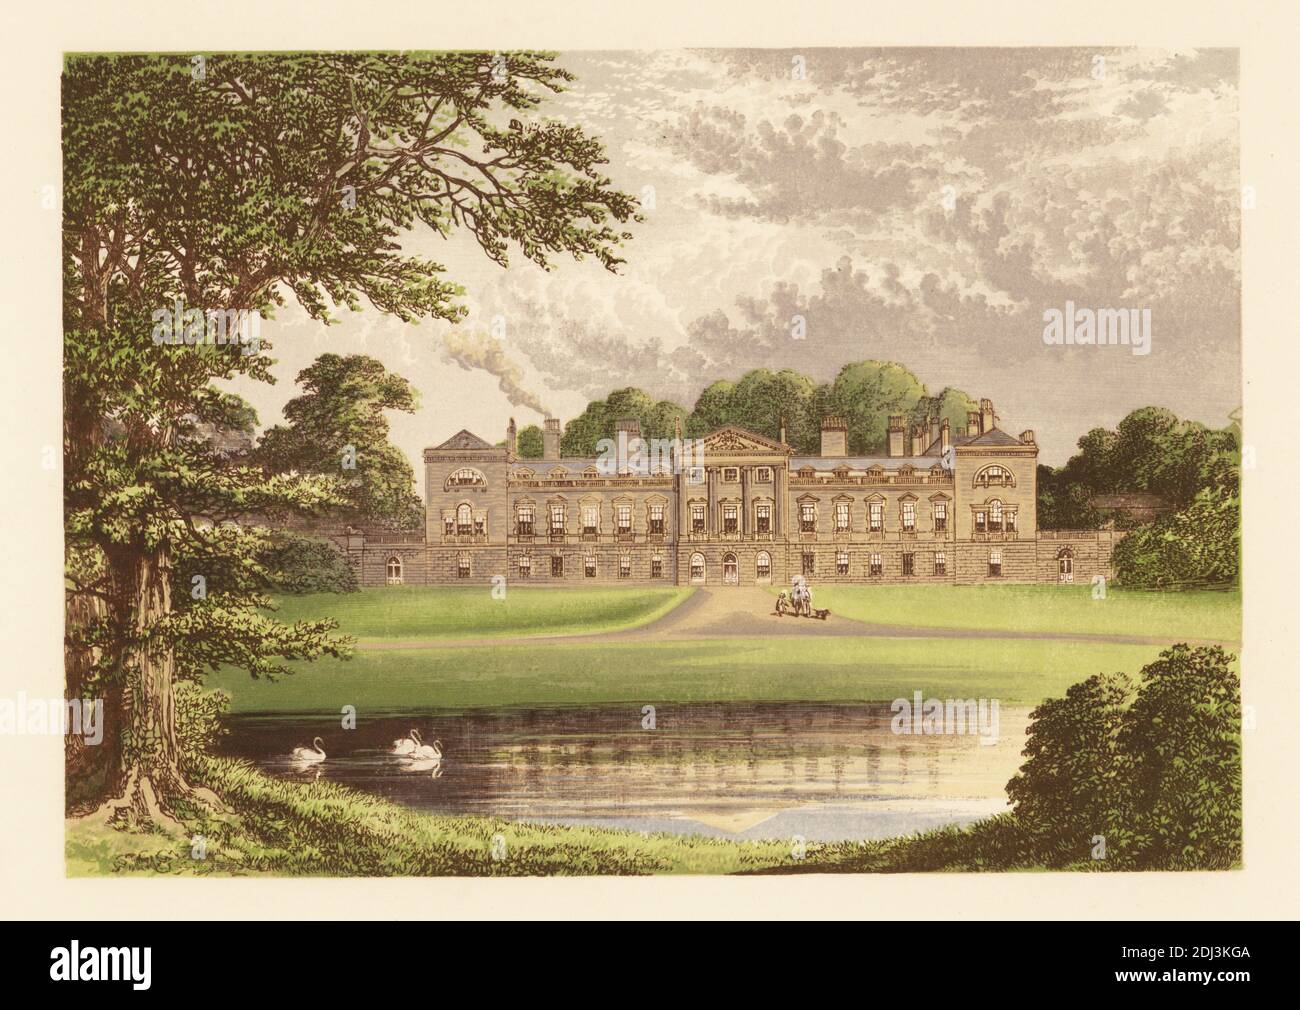 Woburn Abbey, Bedfordshire, England. Country house designed by Henry Flitcroft and Henry Holland and built in 1744 for John Russell, 4th Duke of Bedford, with landscaped gardens and deer park by Humphry Repton. Colour woodblock by Benjamin Fawcett in the Baxter process of an illustration by Alexander Francis Lydon from Reverend Francis Orpen Morris’s Picturesque Views of the Seats of Noblemen and Gentlemen of Great Britain and Ireland, William Mackenzie, London, 1880. Stock Photo